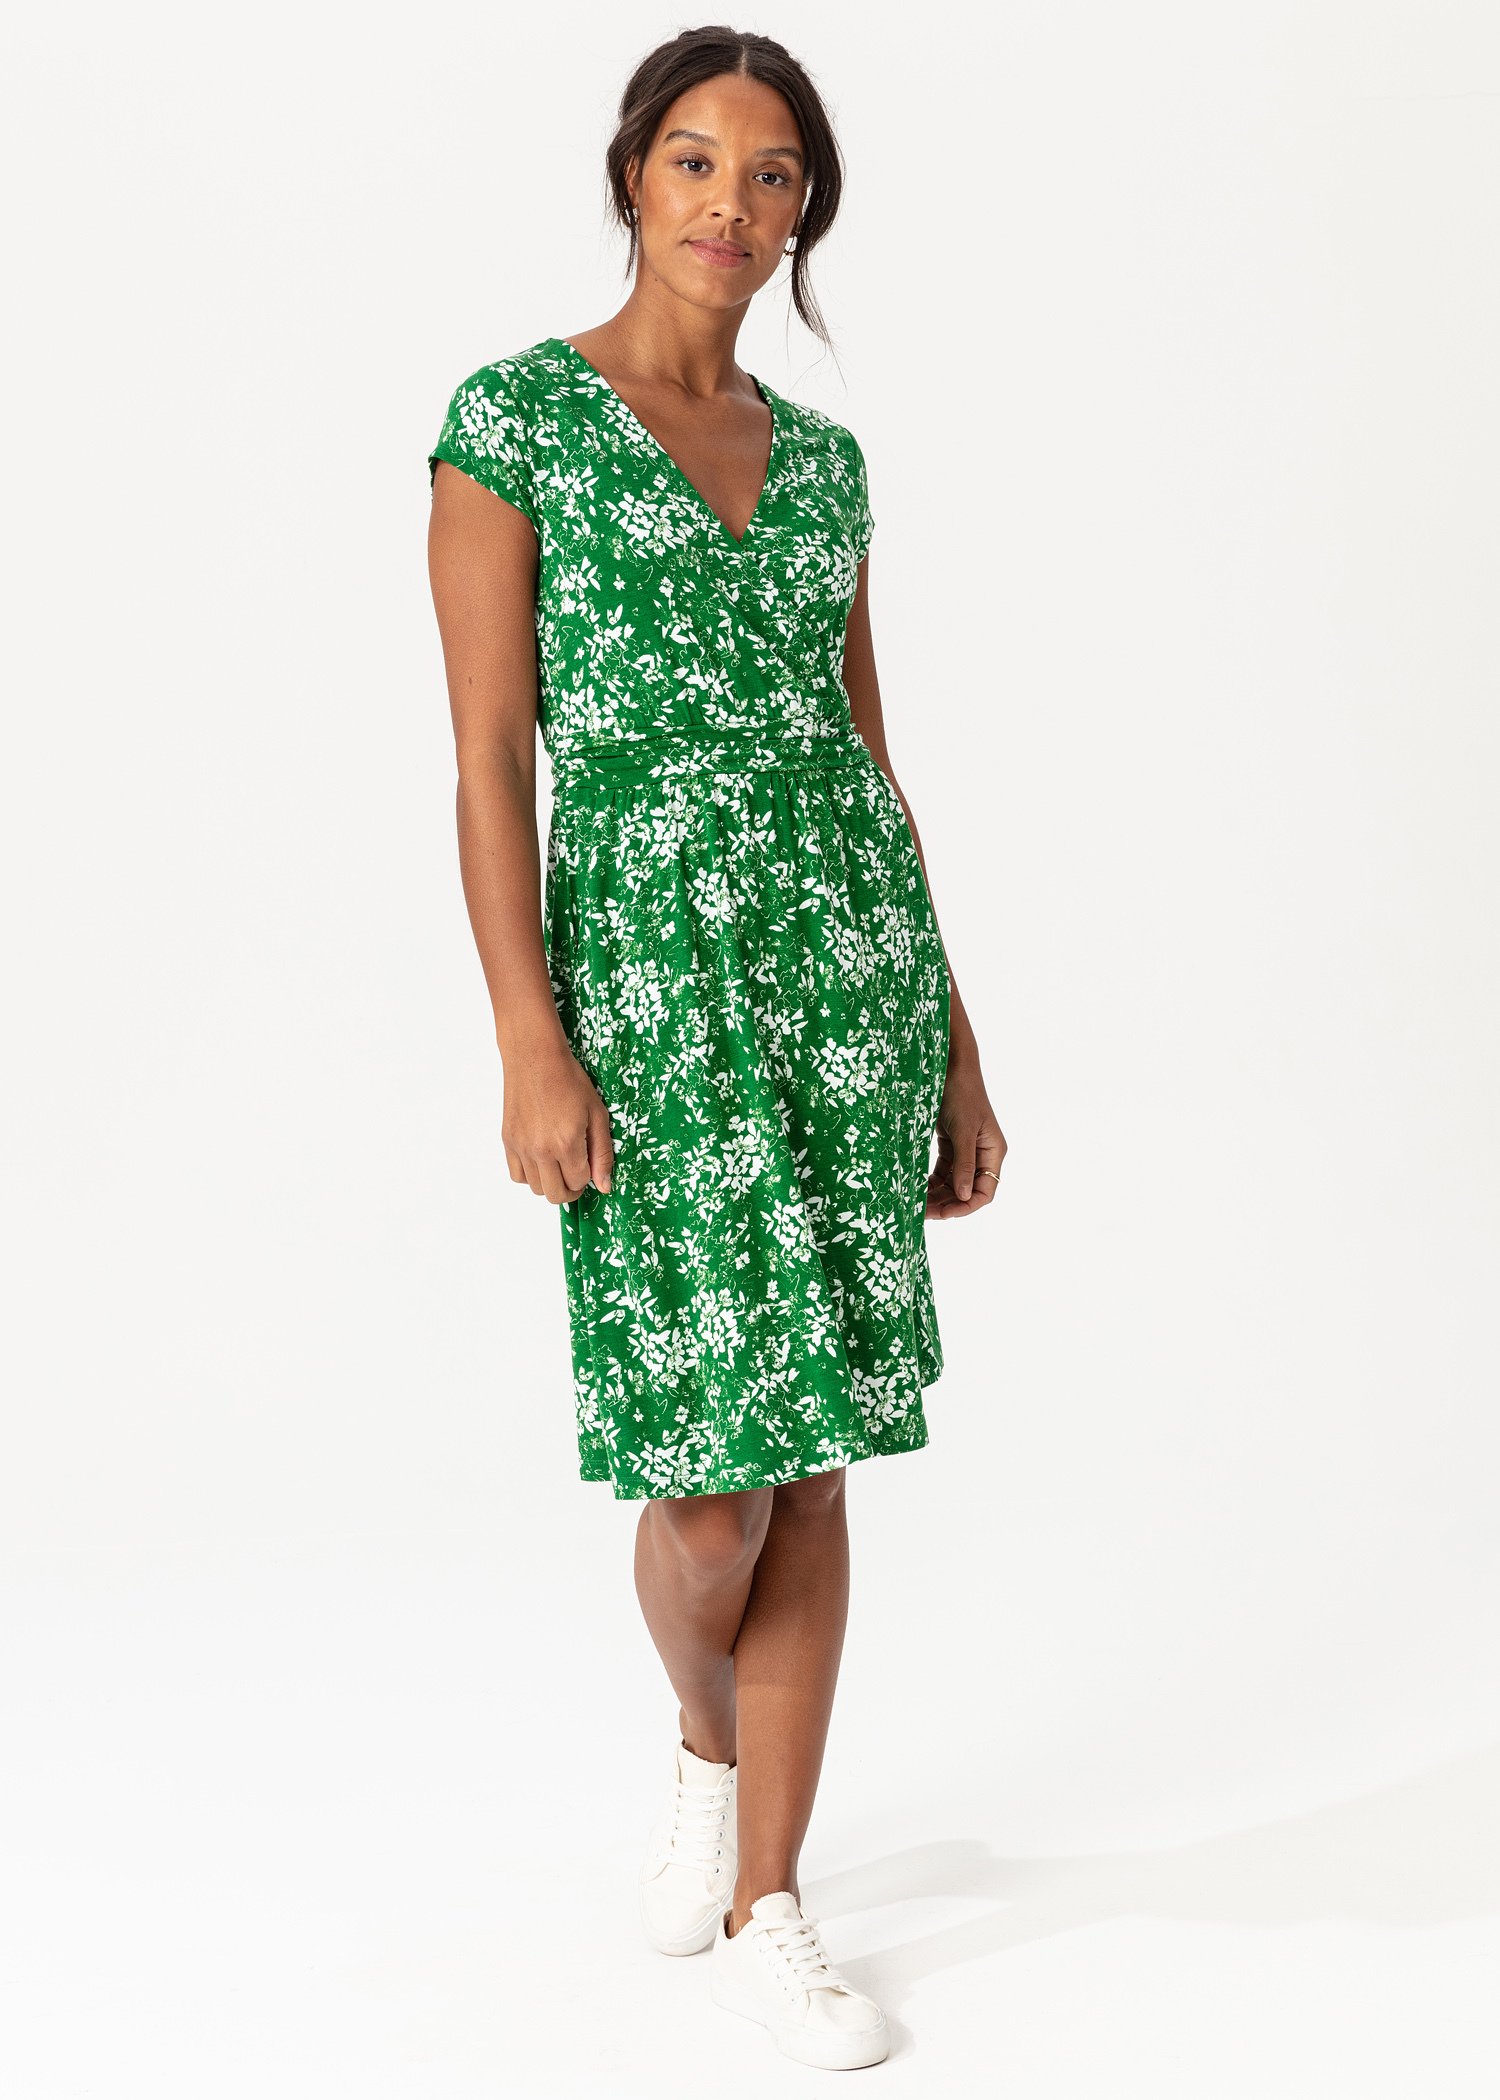 Floral dress with pockets Image 1